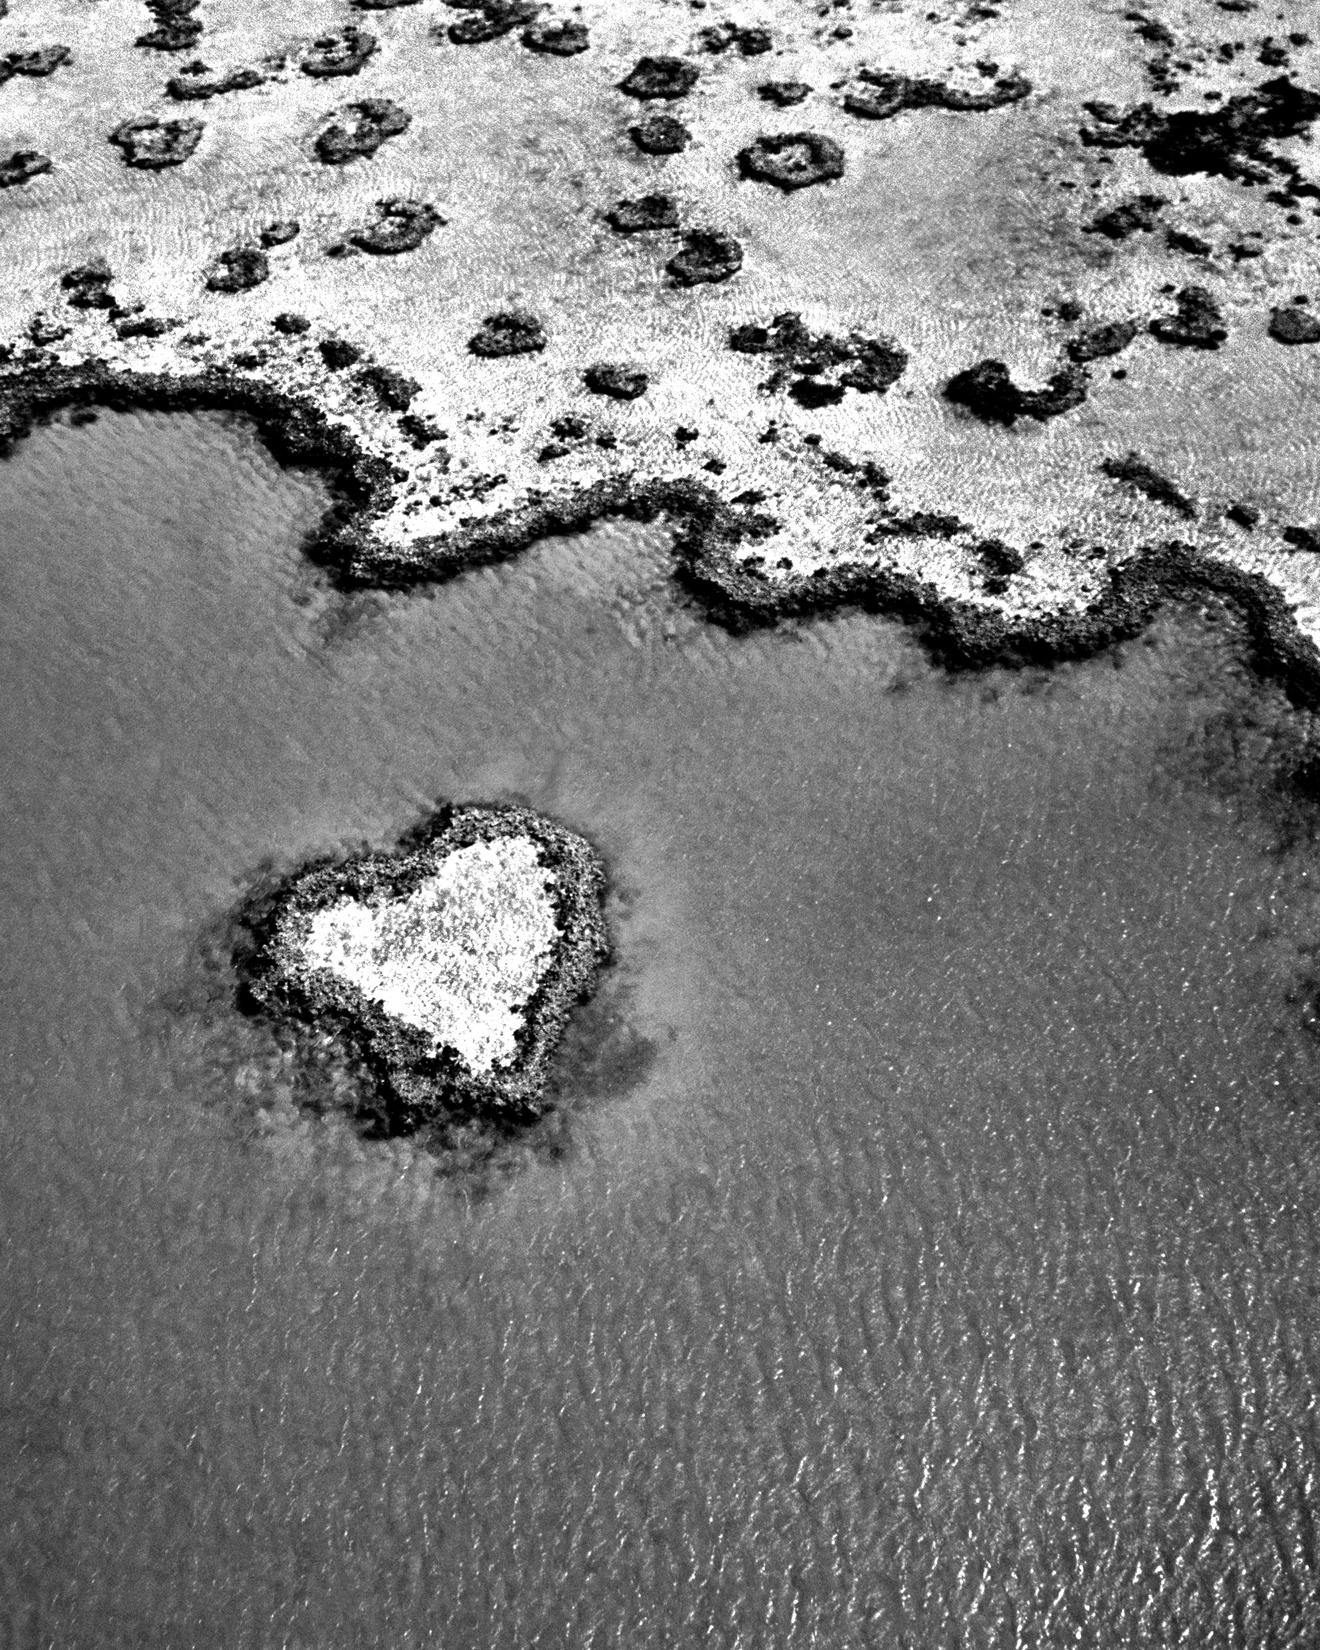 Black and white image of a small heart shaped island in the waters of Australia